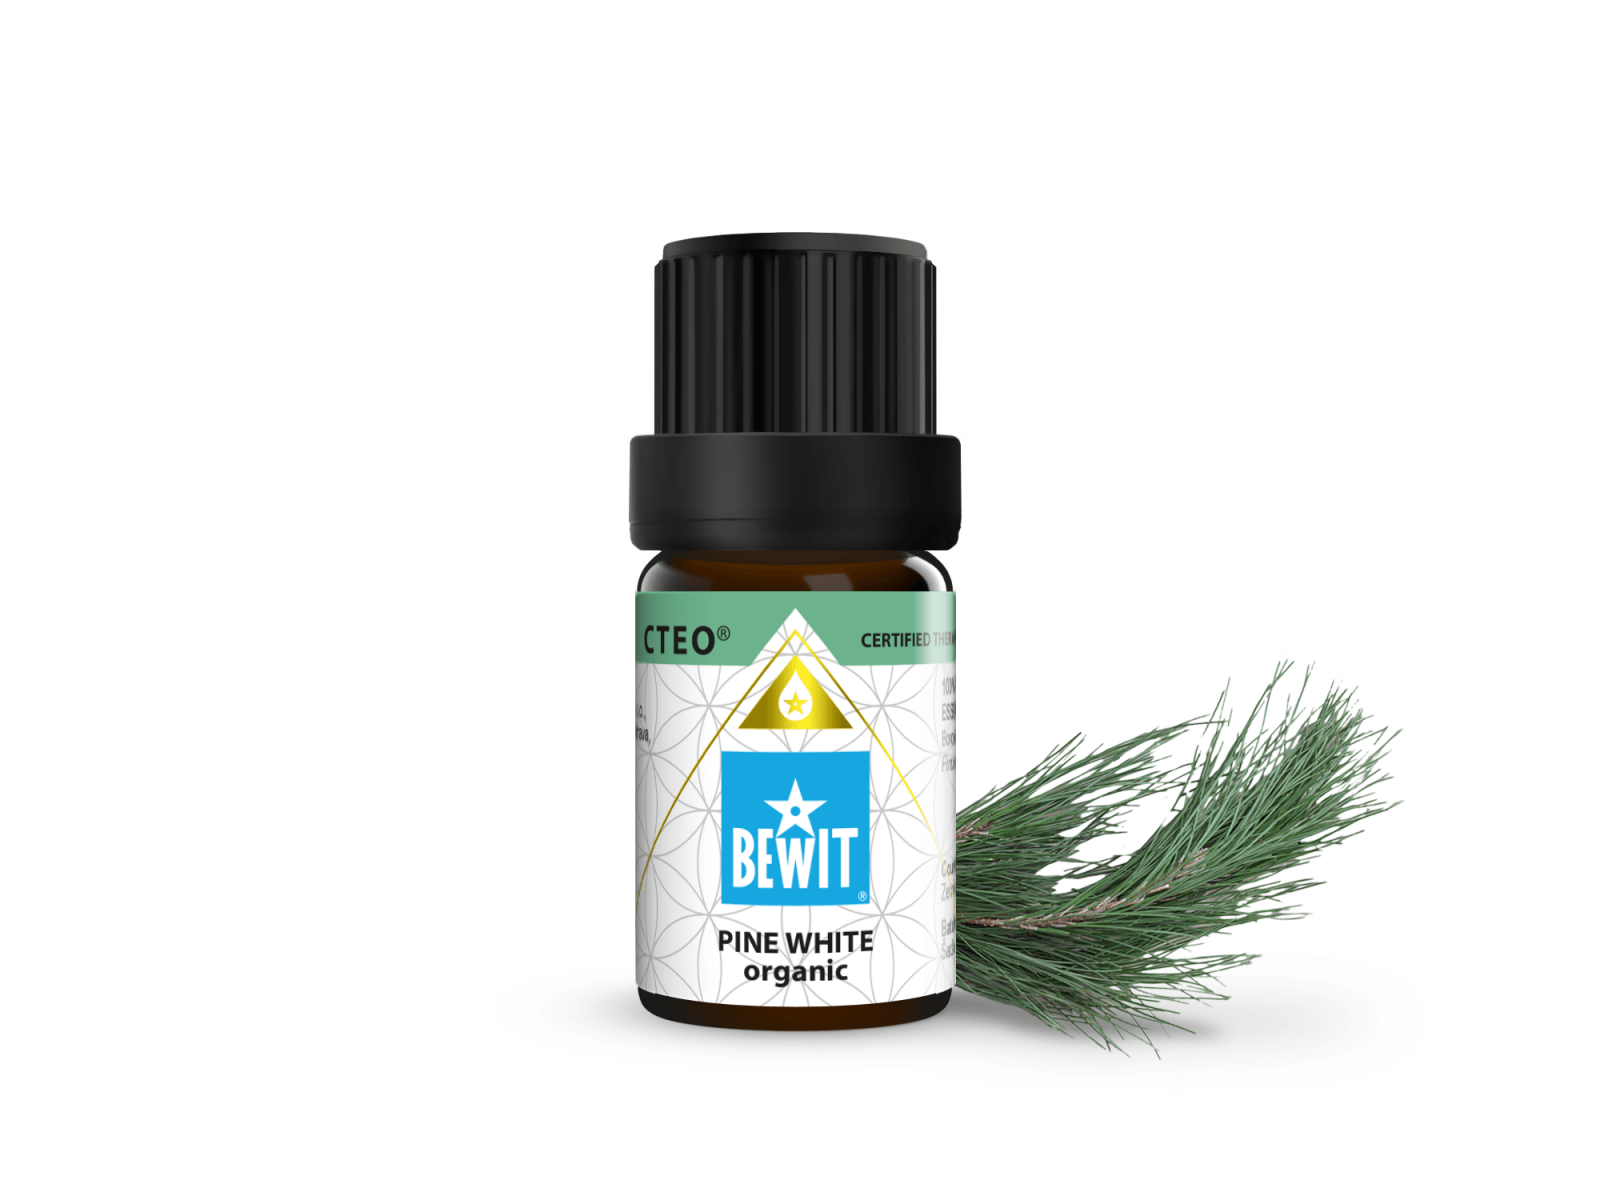 BEWIT Pine Weymouth Organic - 100% pure and natural CTEO® essential oil - 2